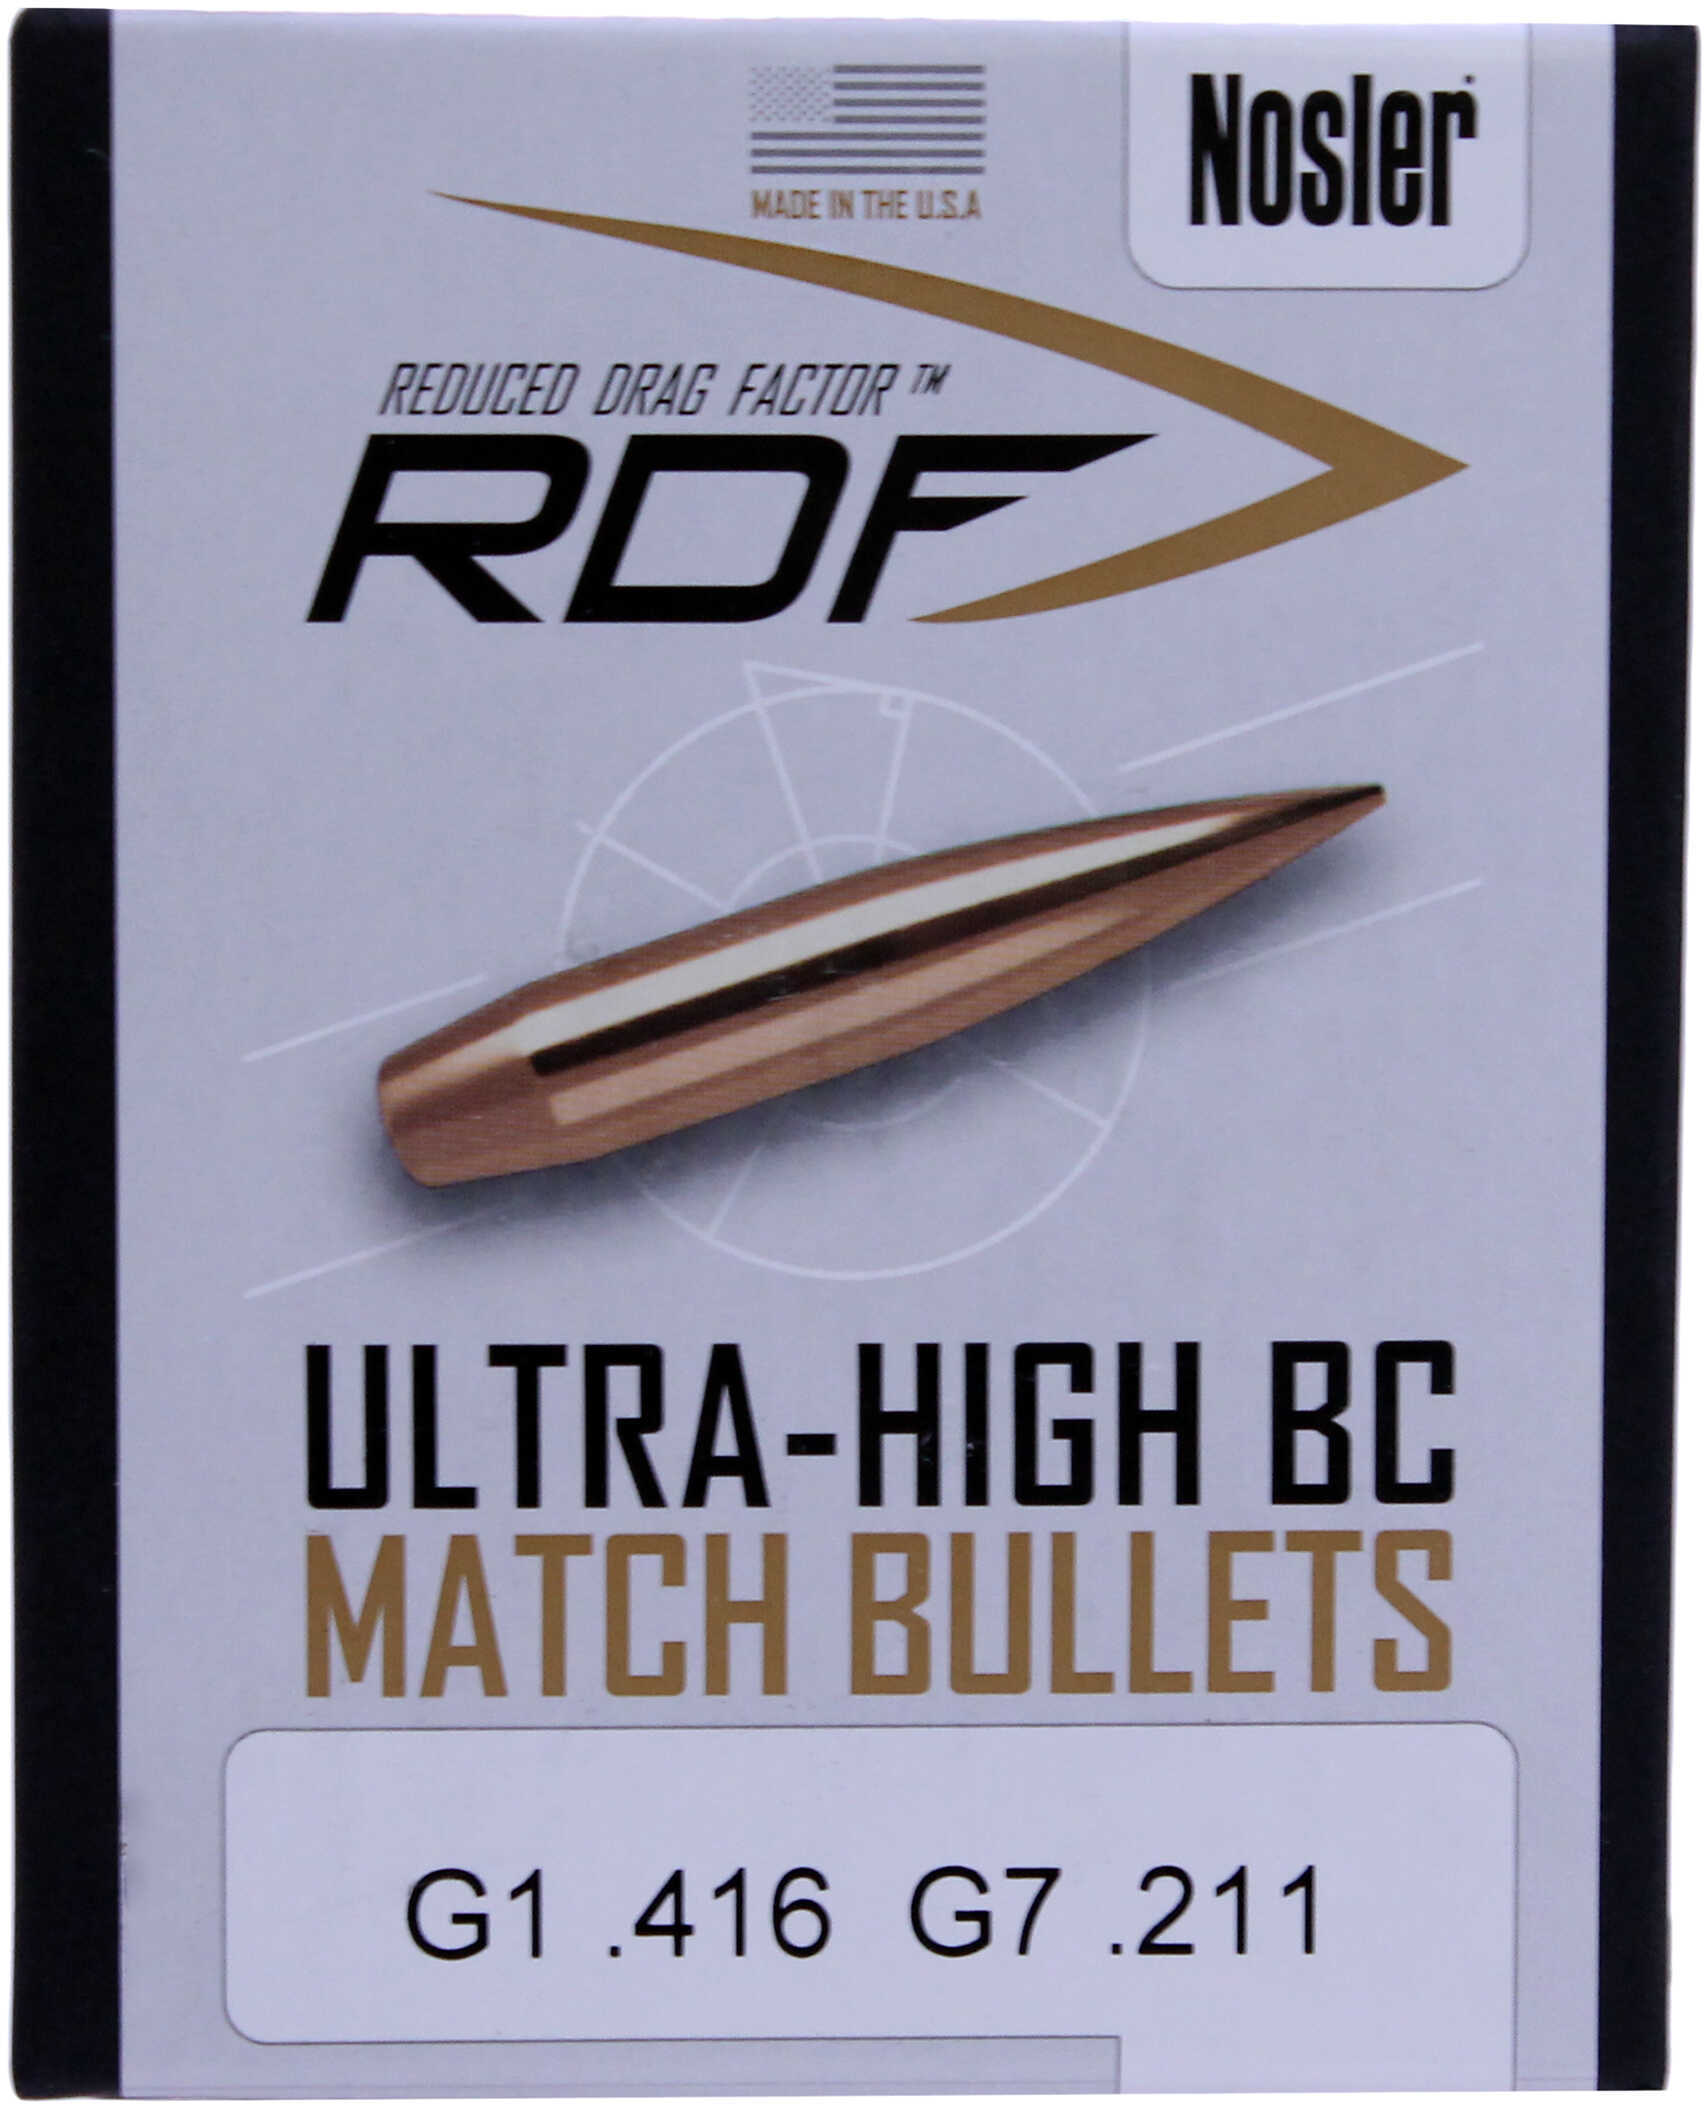 Nosler RDF .22 Caliber 70 Grain Jacketed Hollow Point Bullets 100 Per Box Md: 53066